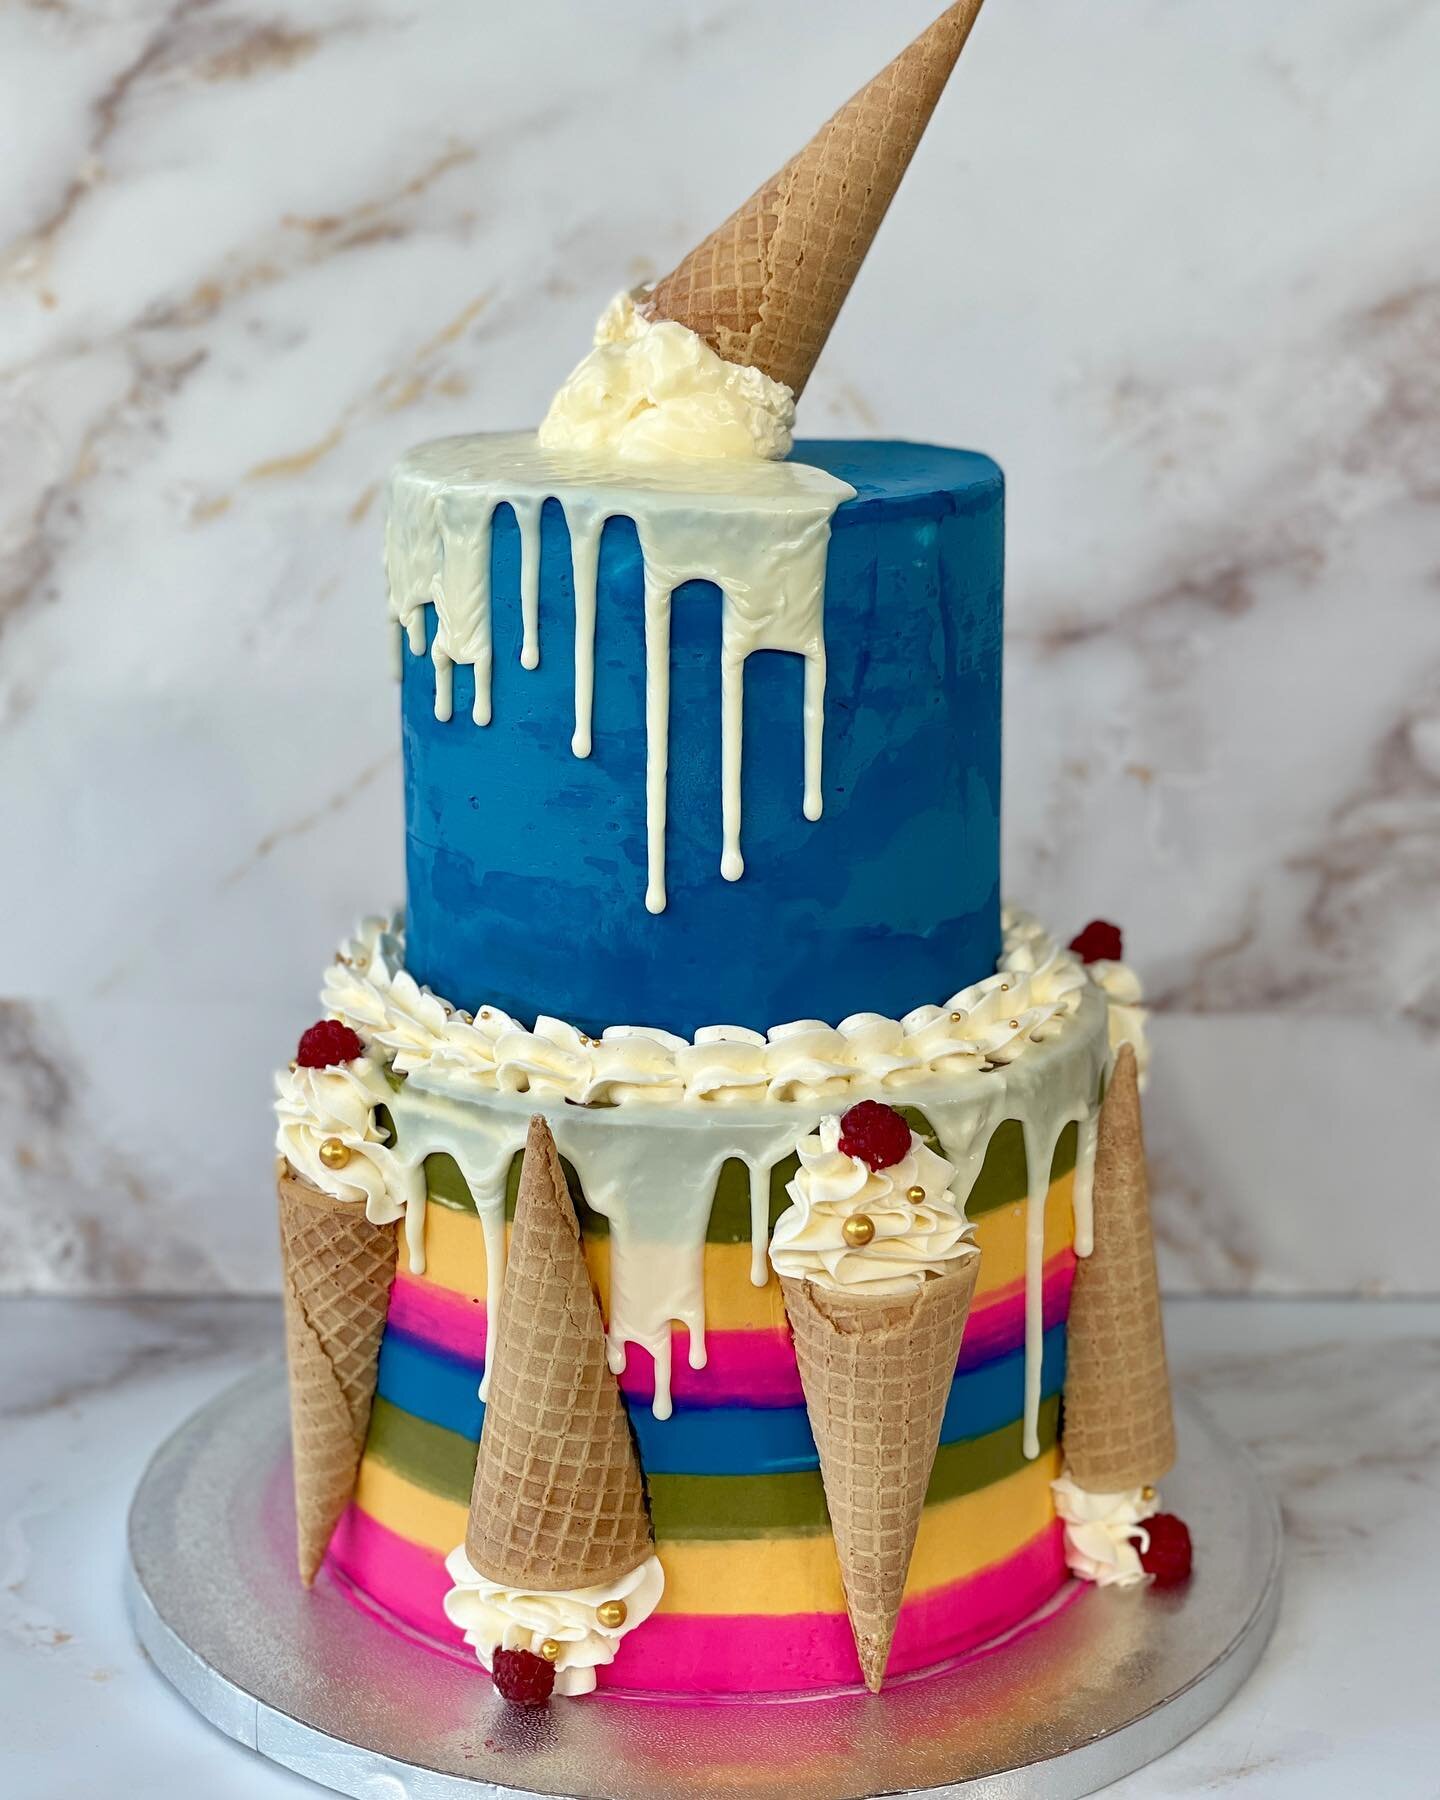 Happy Monday!
This cake screams summer to me! 
.
.
.
.
.
.
.
.
#cake #cakedecorating #icecream #icecreamcake #cakedesign #pastry #pastries #dessert #sweet #baker #eastbay #eastbayeats #eastbayfoodie #eastbaydesserts #bayarea #bayareaeats #bayareafood